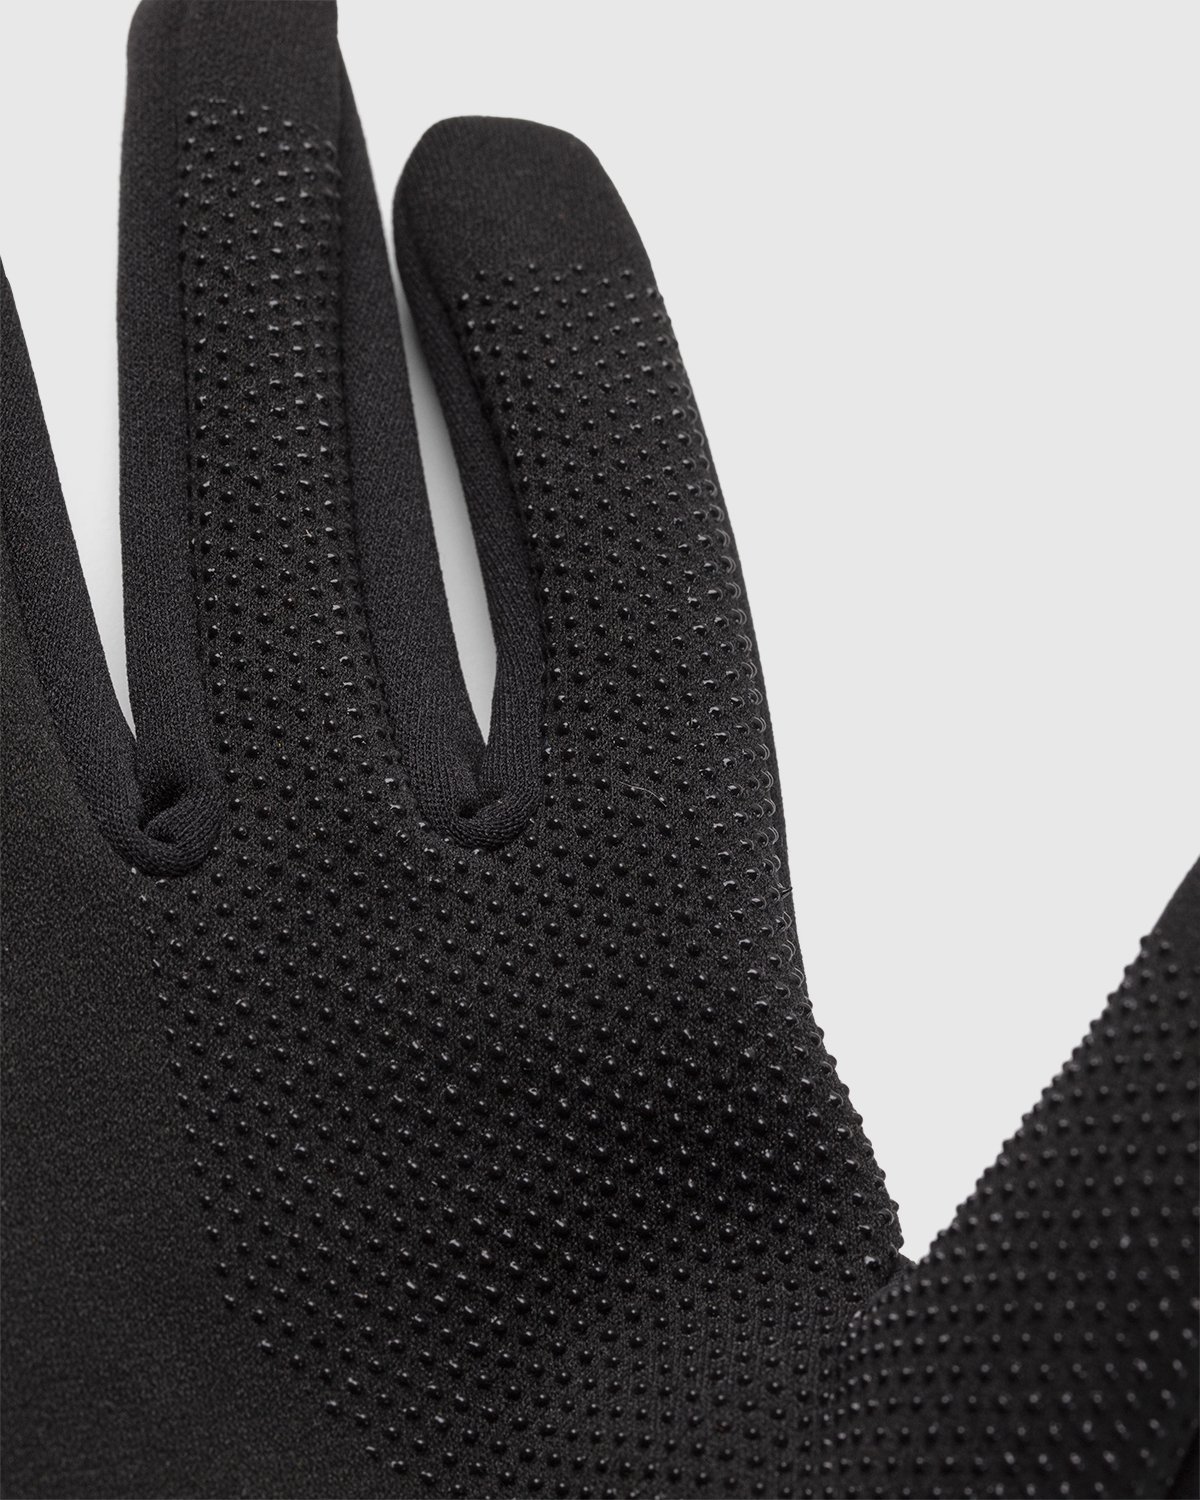 The North Face - Etip Recycled Gloves Black - Accessories - Black - Image 4